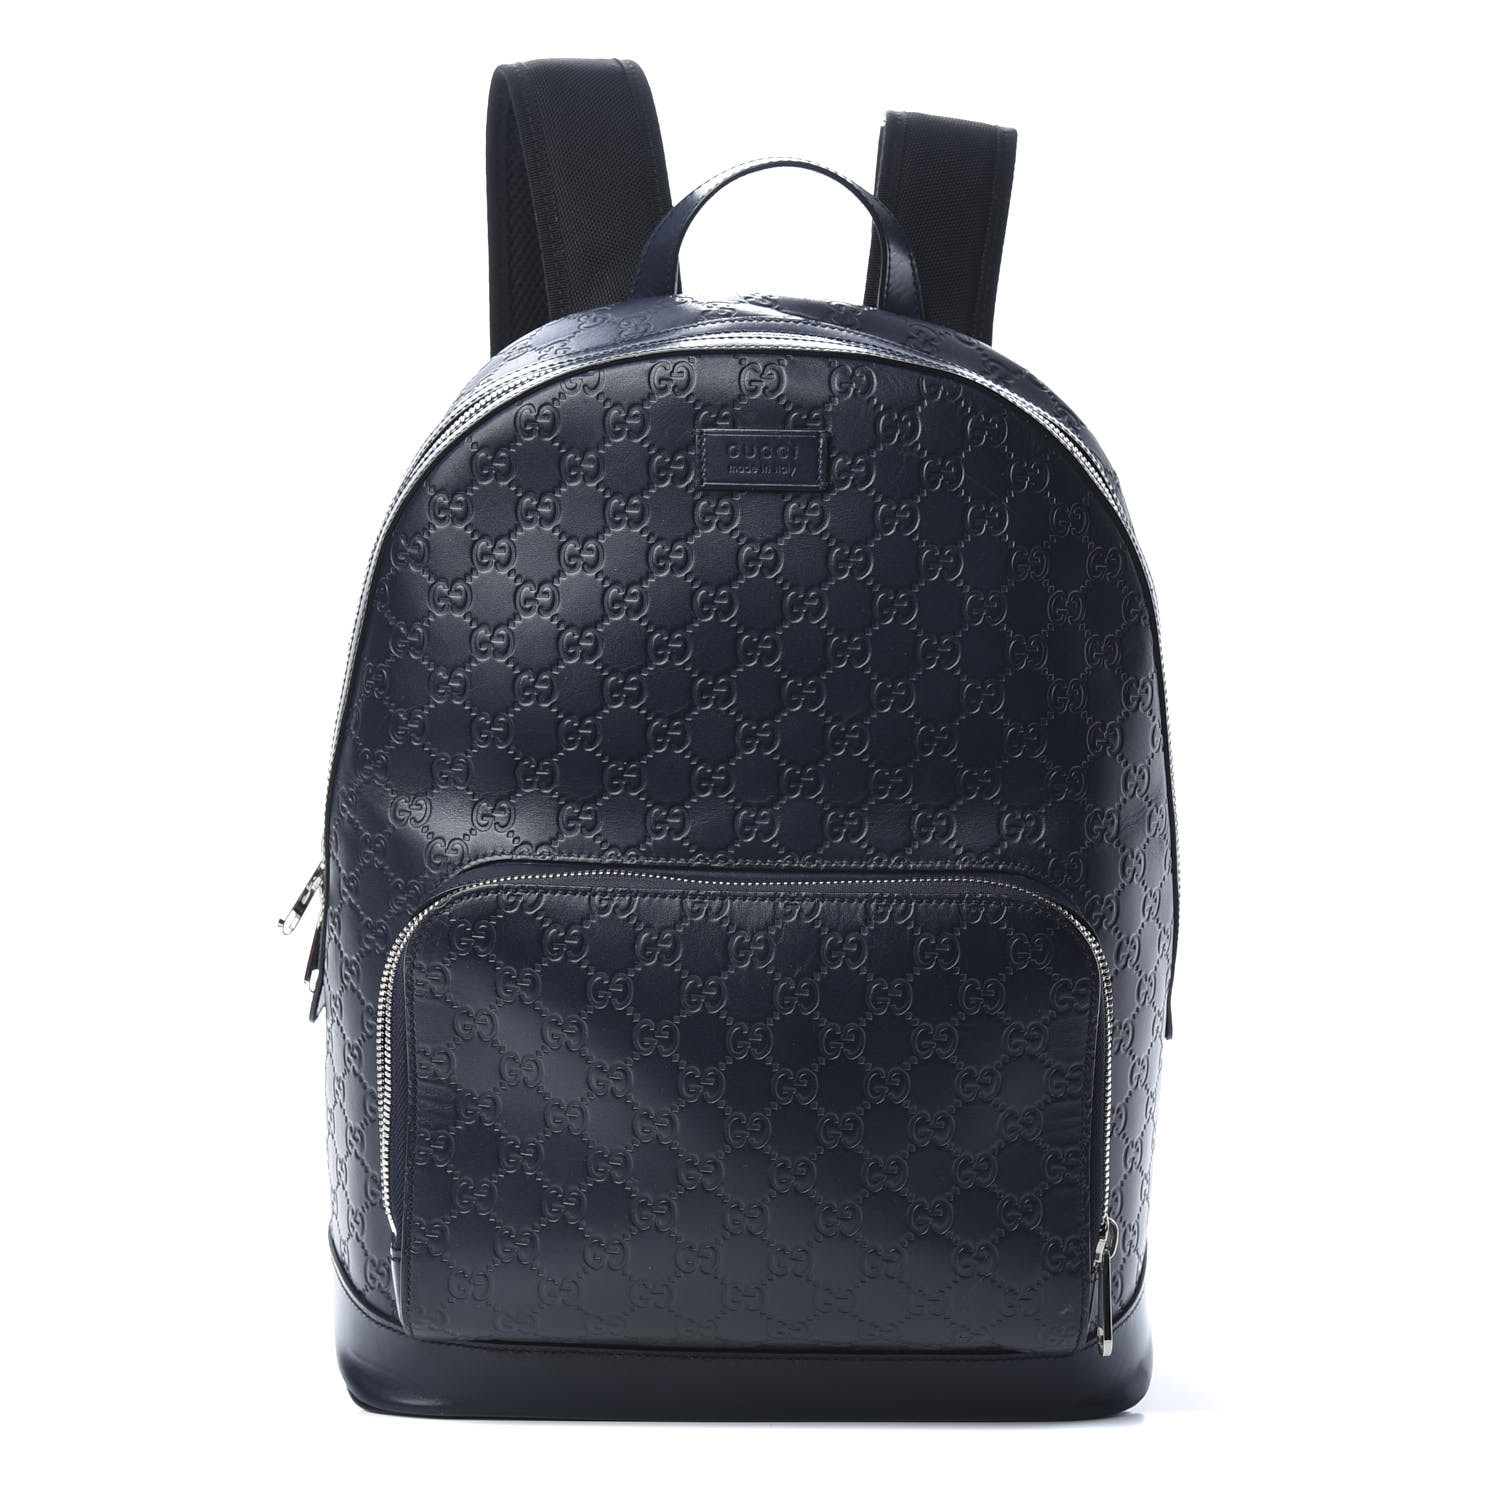 GUCCI Guccissima Signature Day Backpack Navy 669072 | FASHIONPHILE